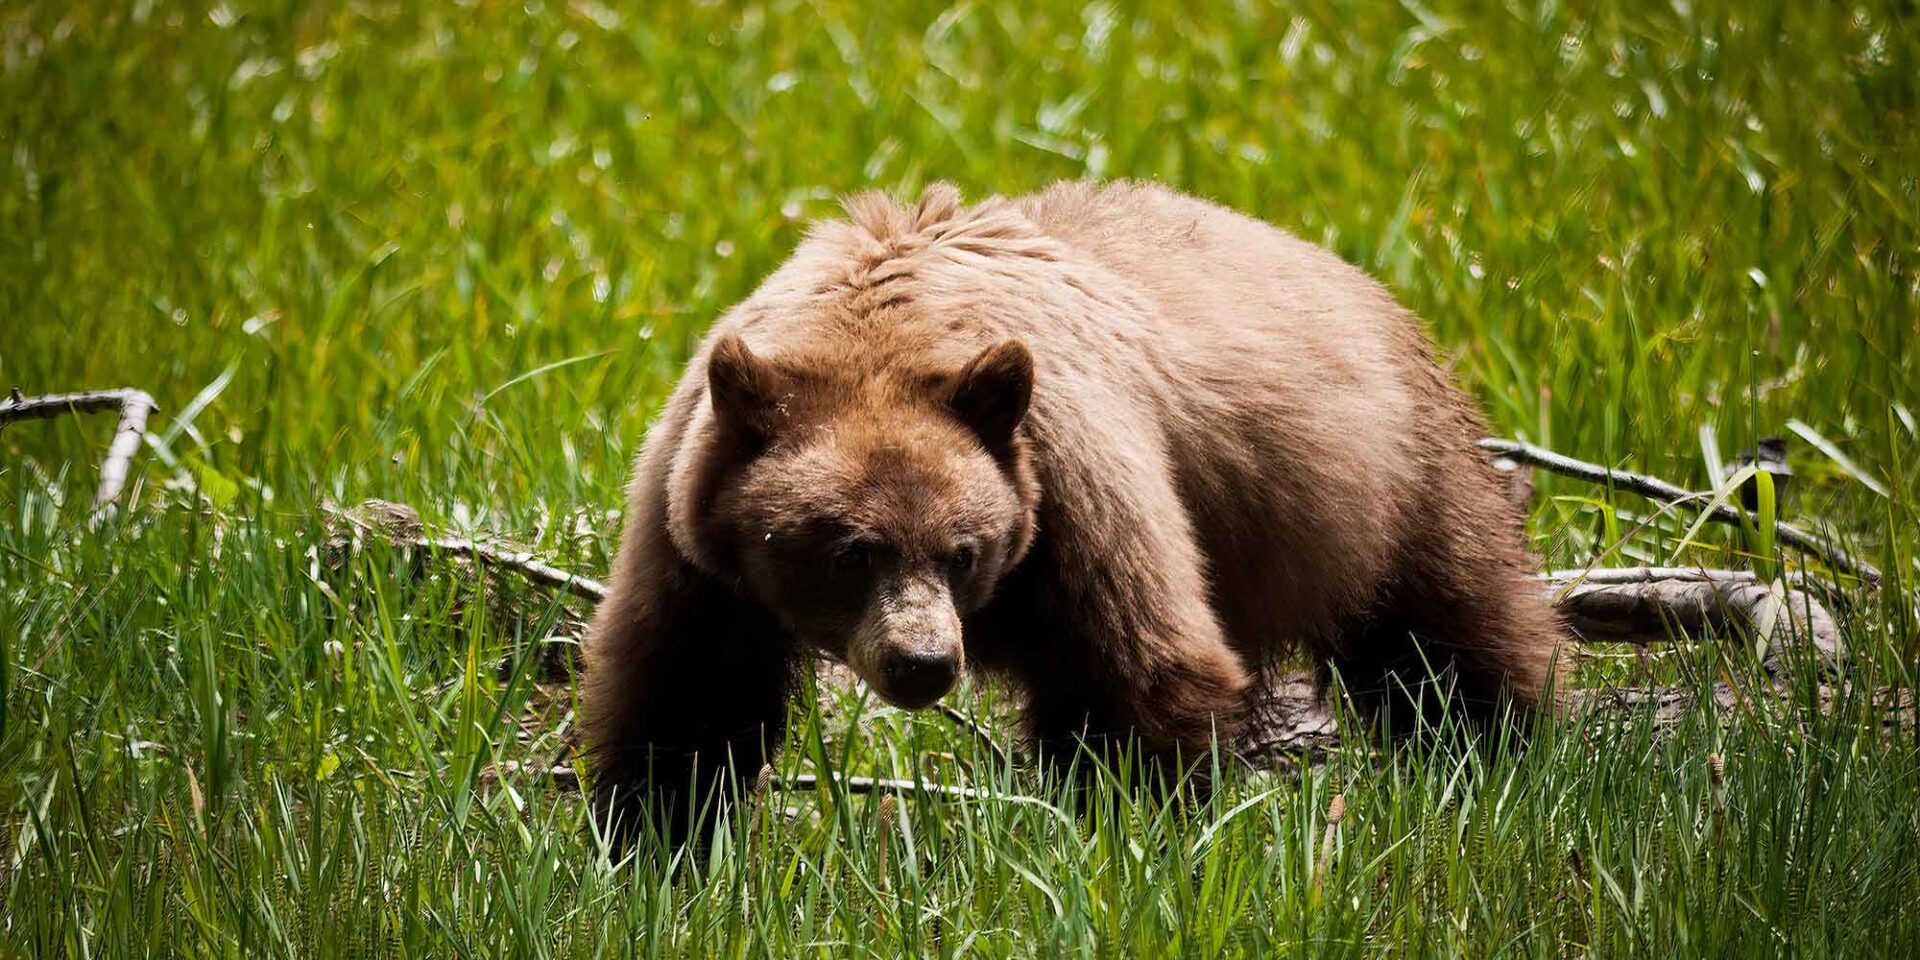 A black bear that has a brown, cinnamon blond coat has searches for food in a green grassy meadow where it might find tasty insects in fallen branches.